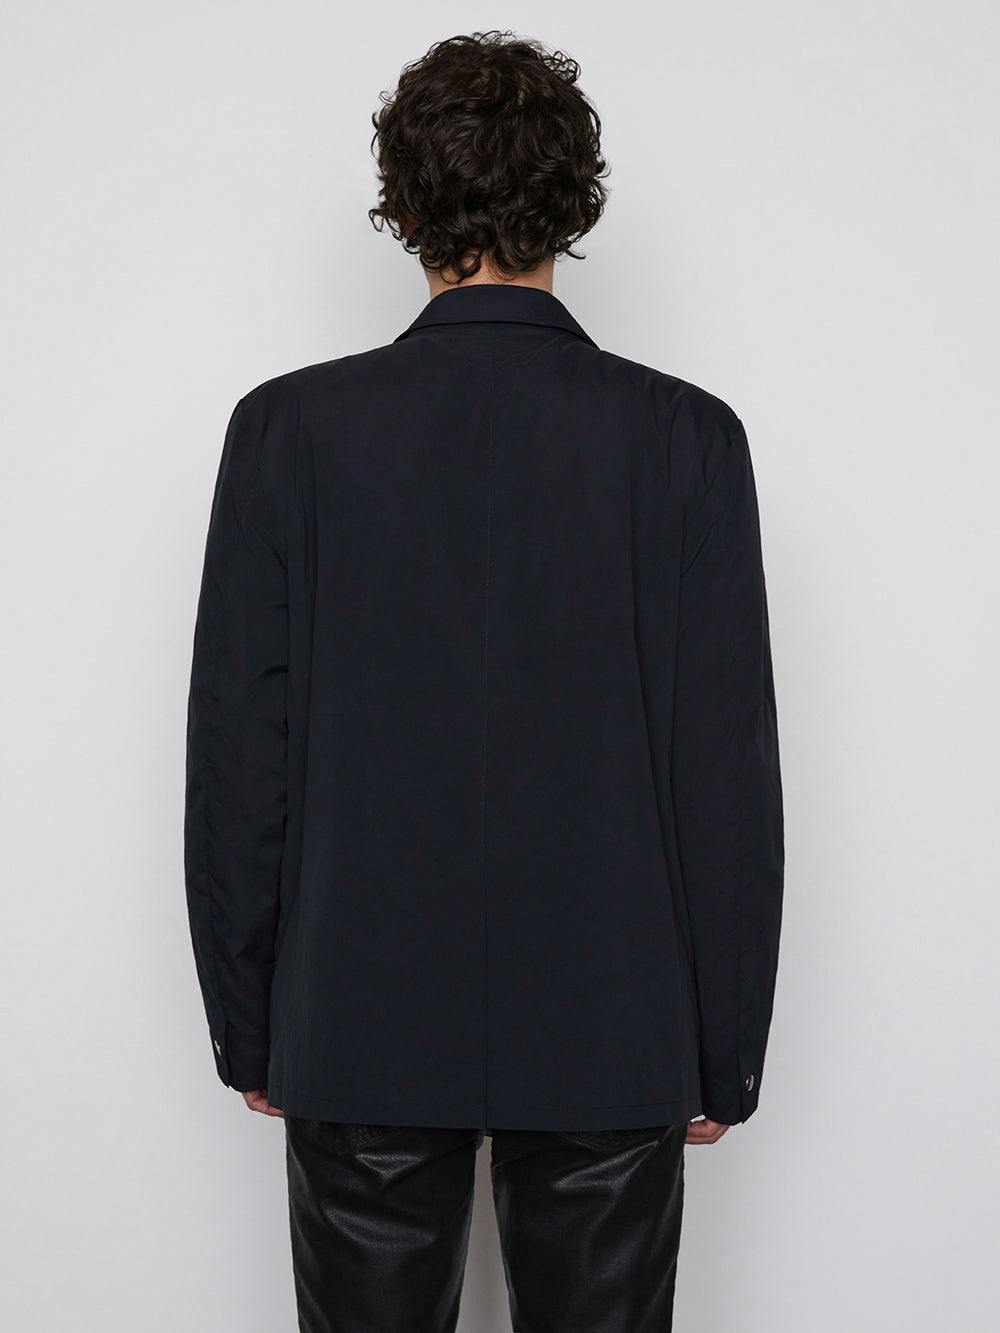 jacket back view